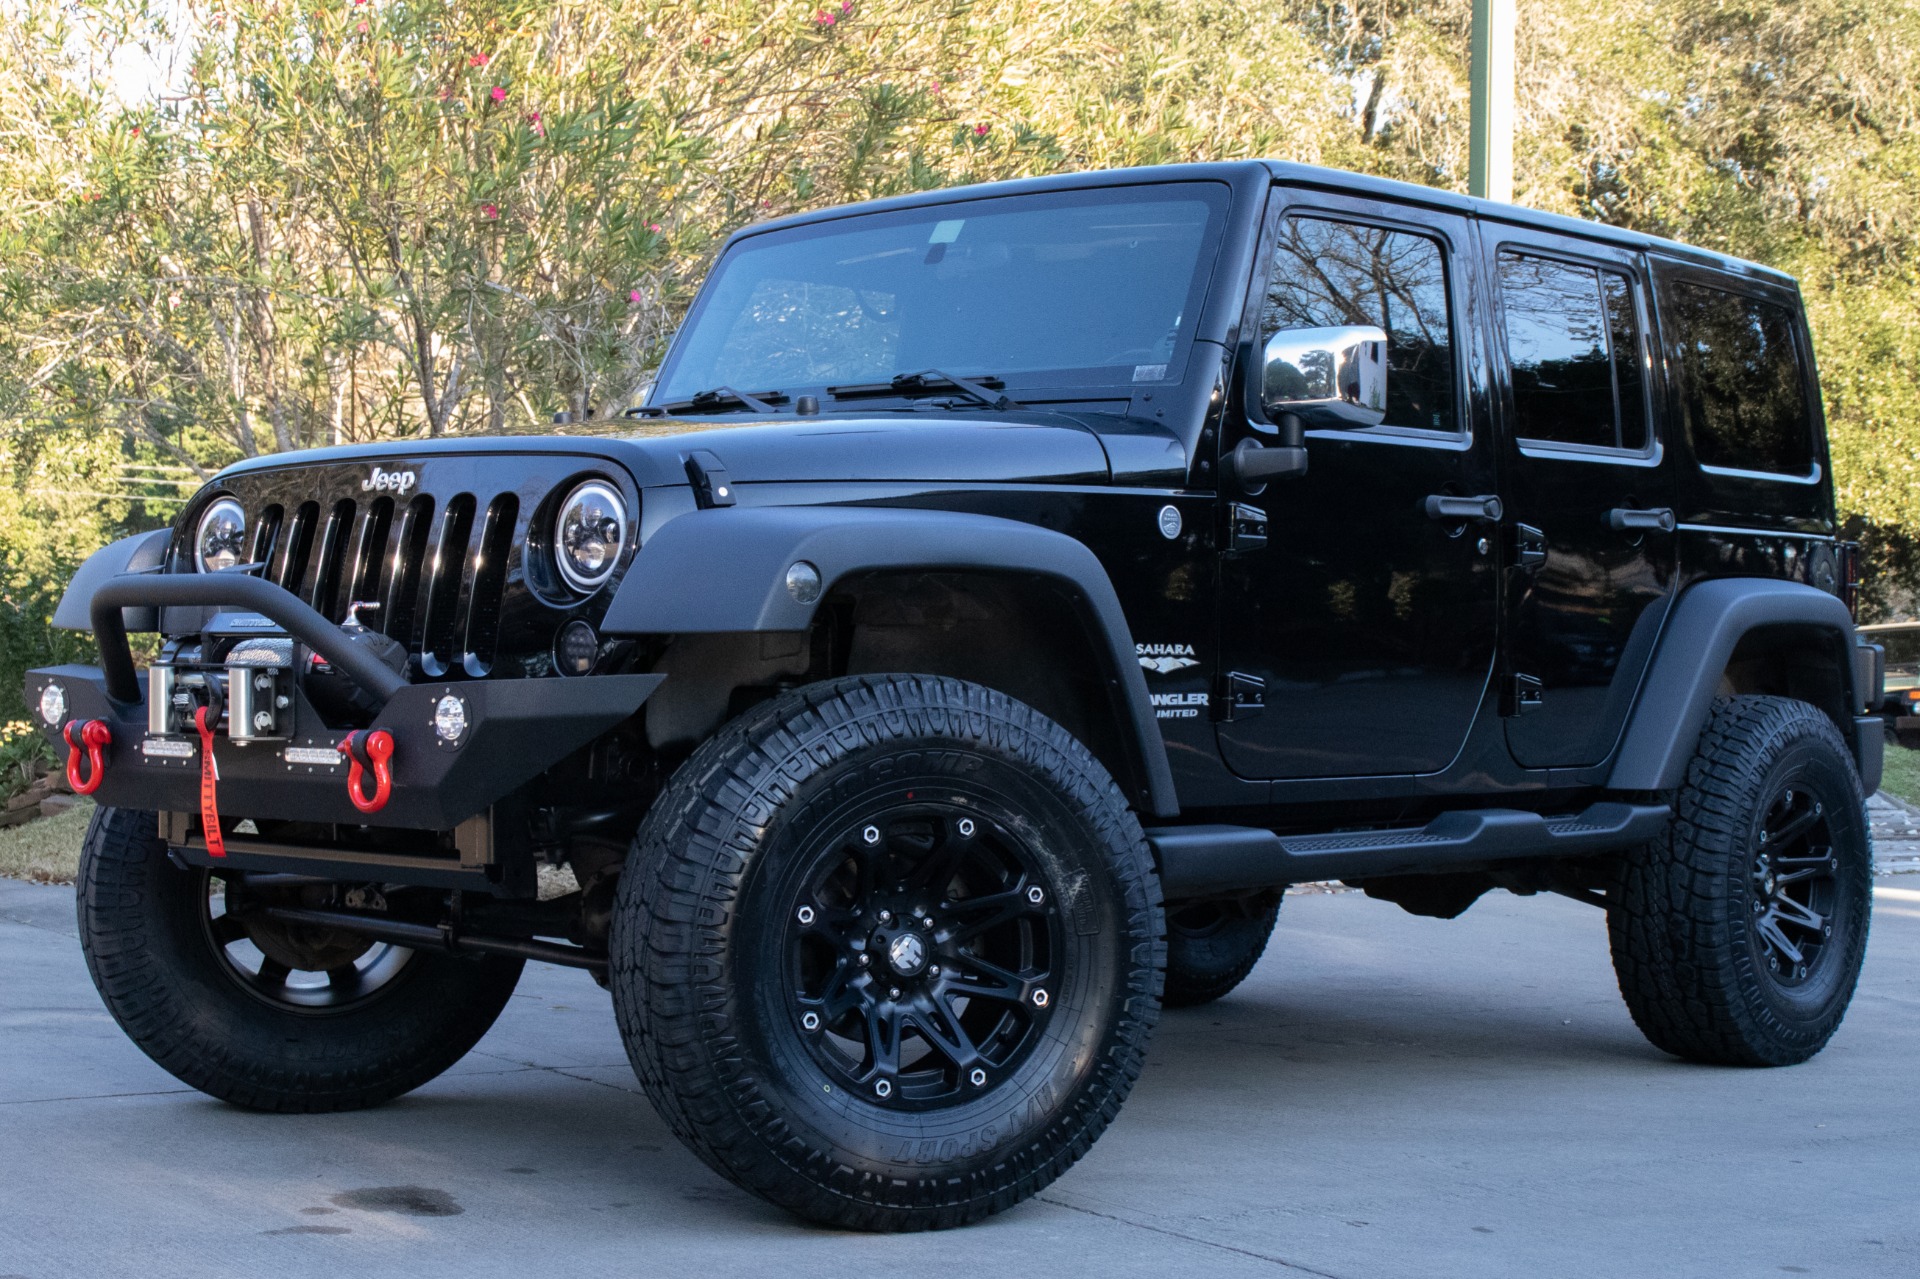 Used 2011 Jeep Wrangler Unlimited Sahara For Sale ($23,995) | Select ...